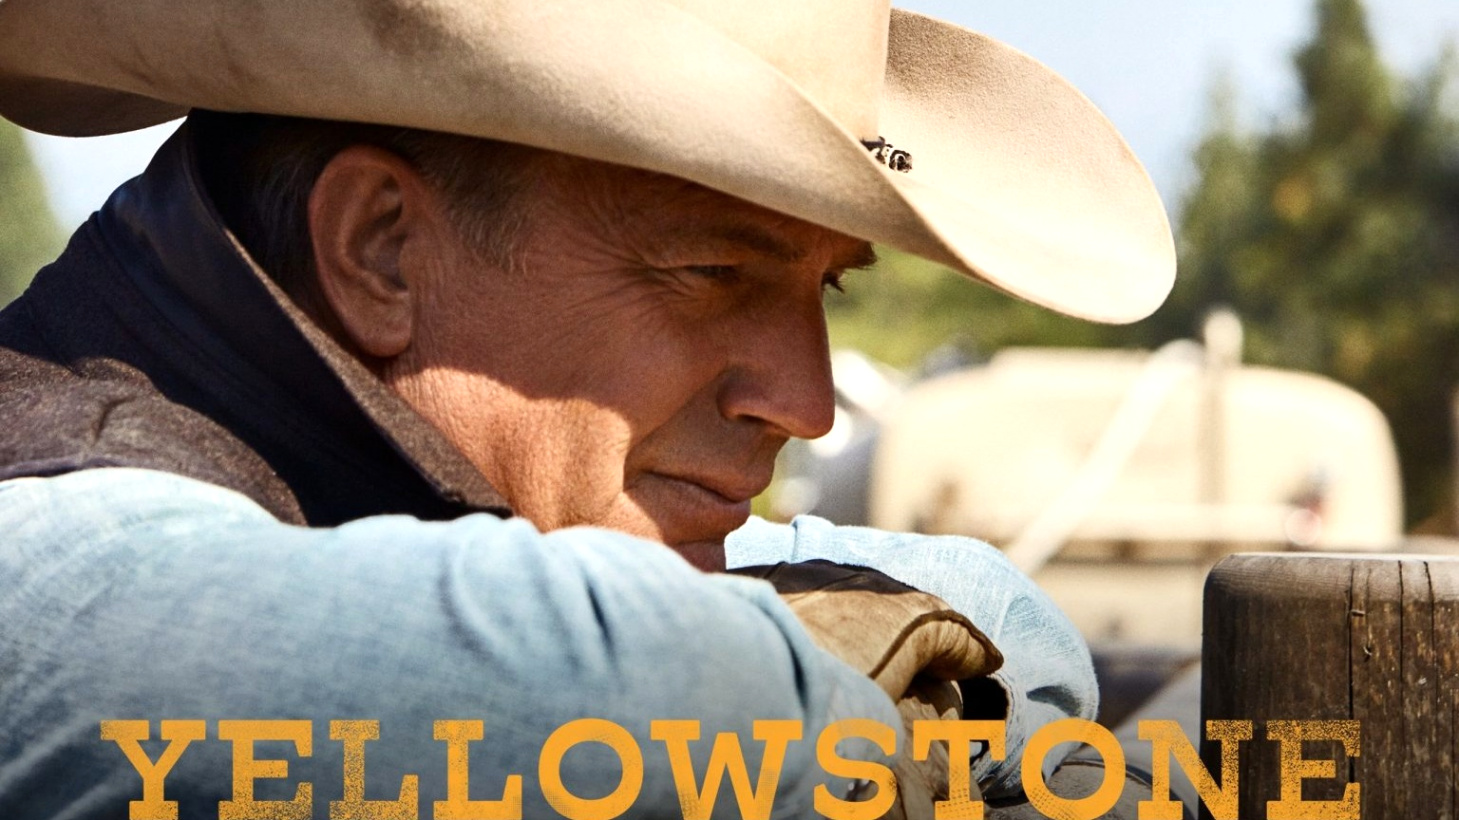 Cheap Vpn In Yellowstone Mt Dans How to Watch Yellowstone Season 4 From Anywhere, Release Date ...